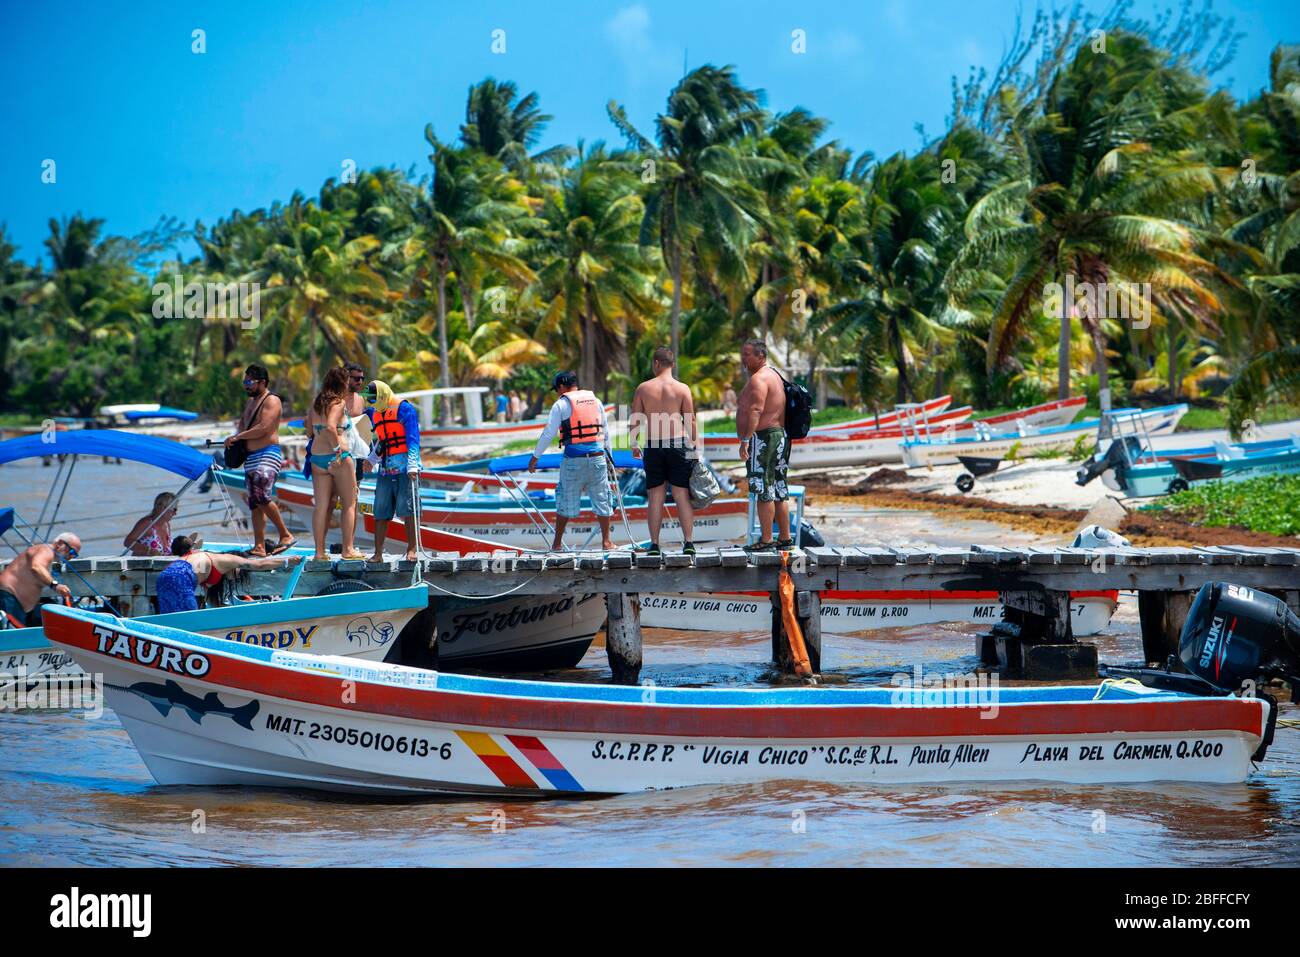 Tourists and boats in the beach in Punta Allen Sian Ka'an Reserve, Yucatan Peninsula, Mexico.  In the language of the Mayan peoples who once inhabited Stock Photo